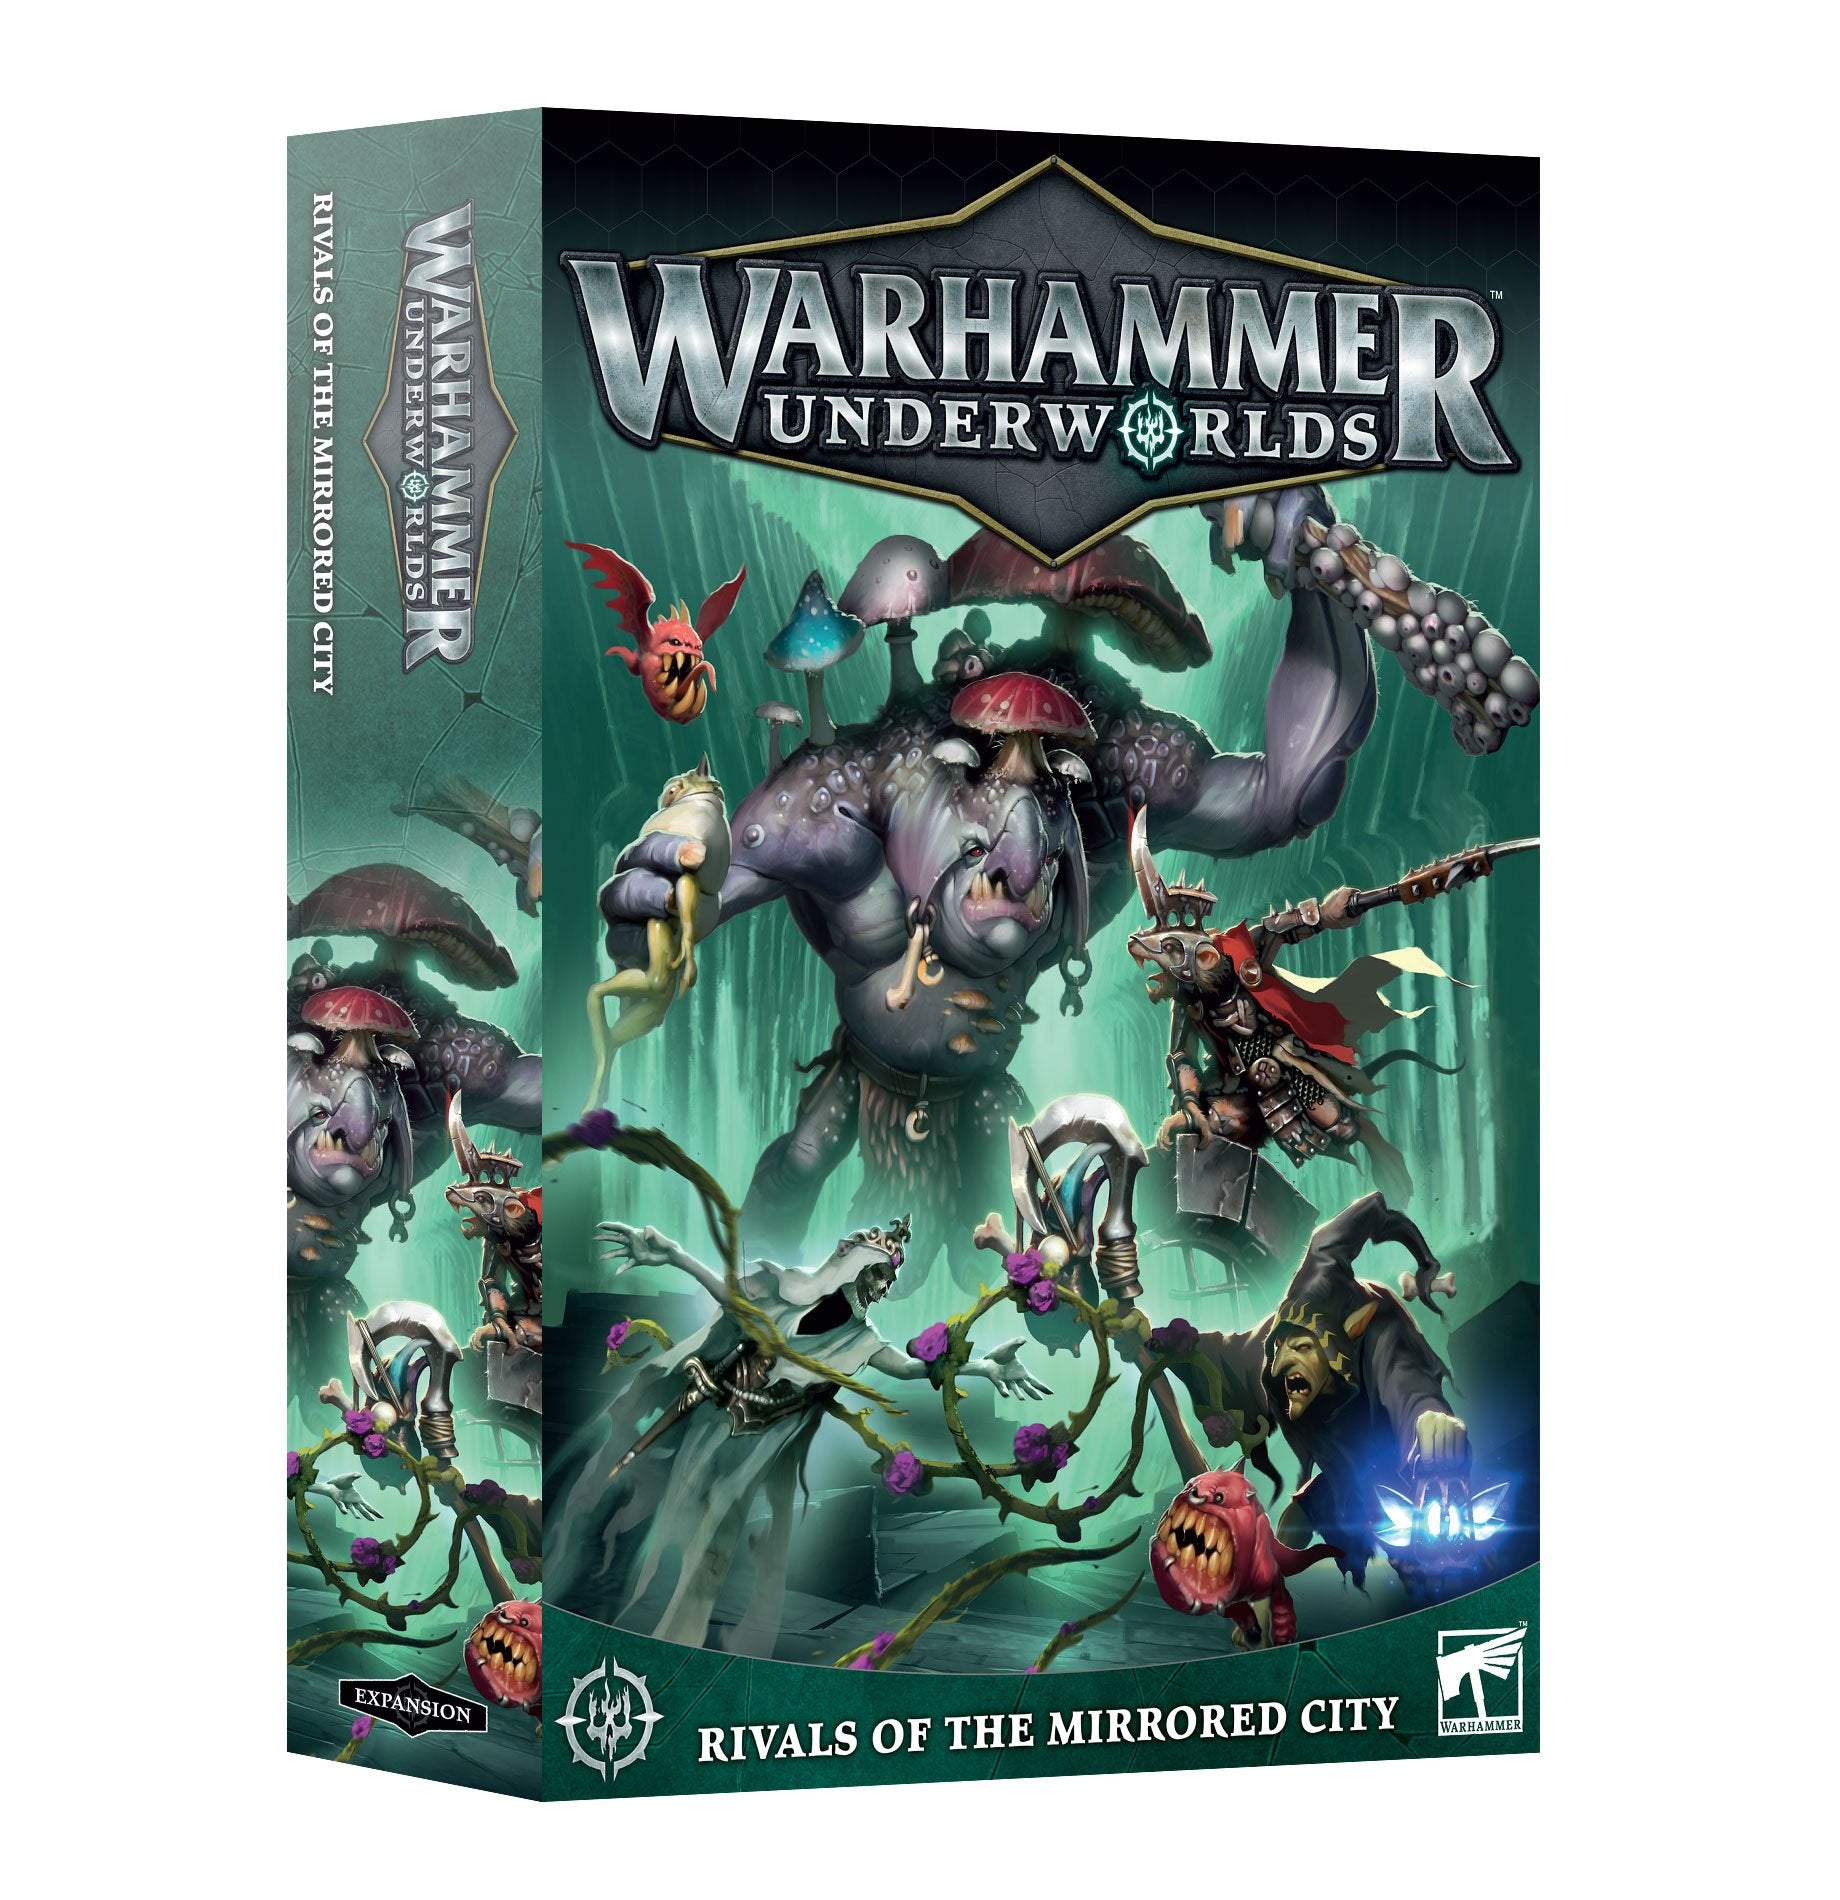 Warhammer Underworlds: Rivals of the Mirrored City - Release Date 30/3/24 - Loaded Dice